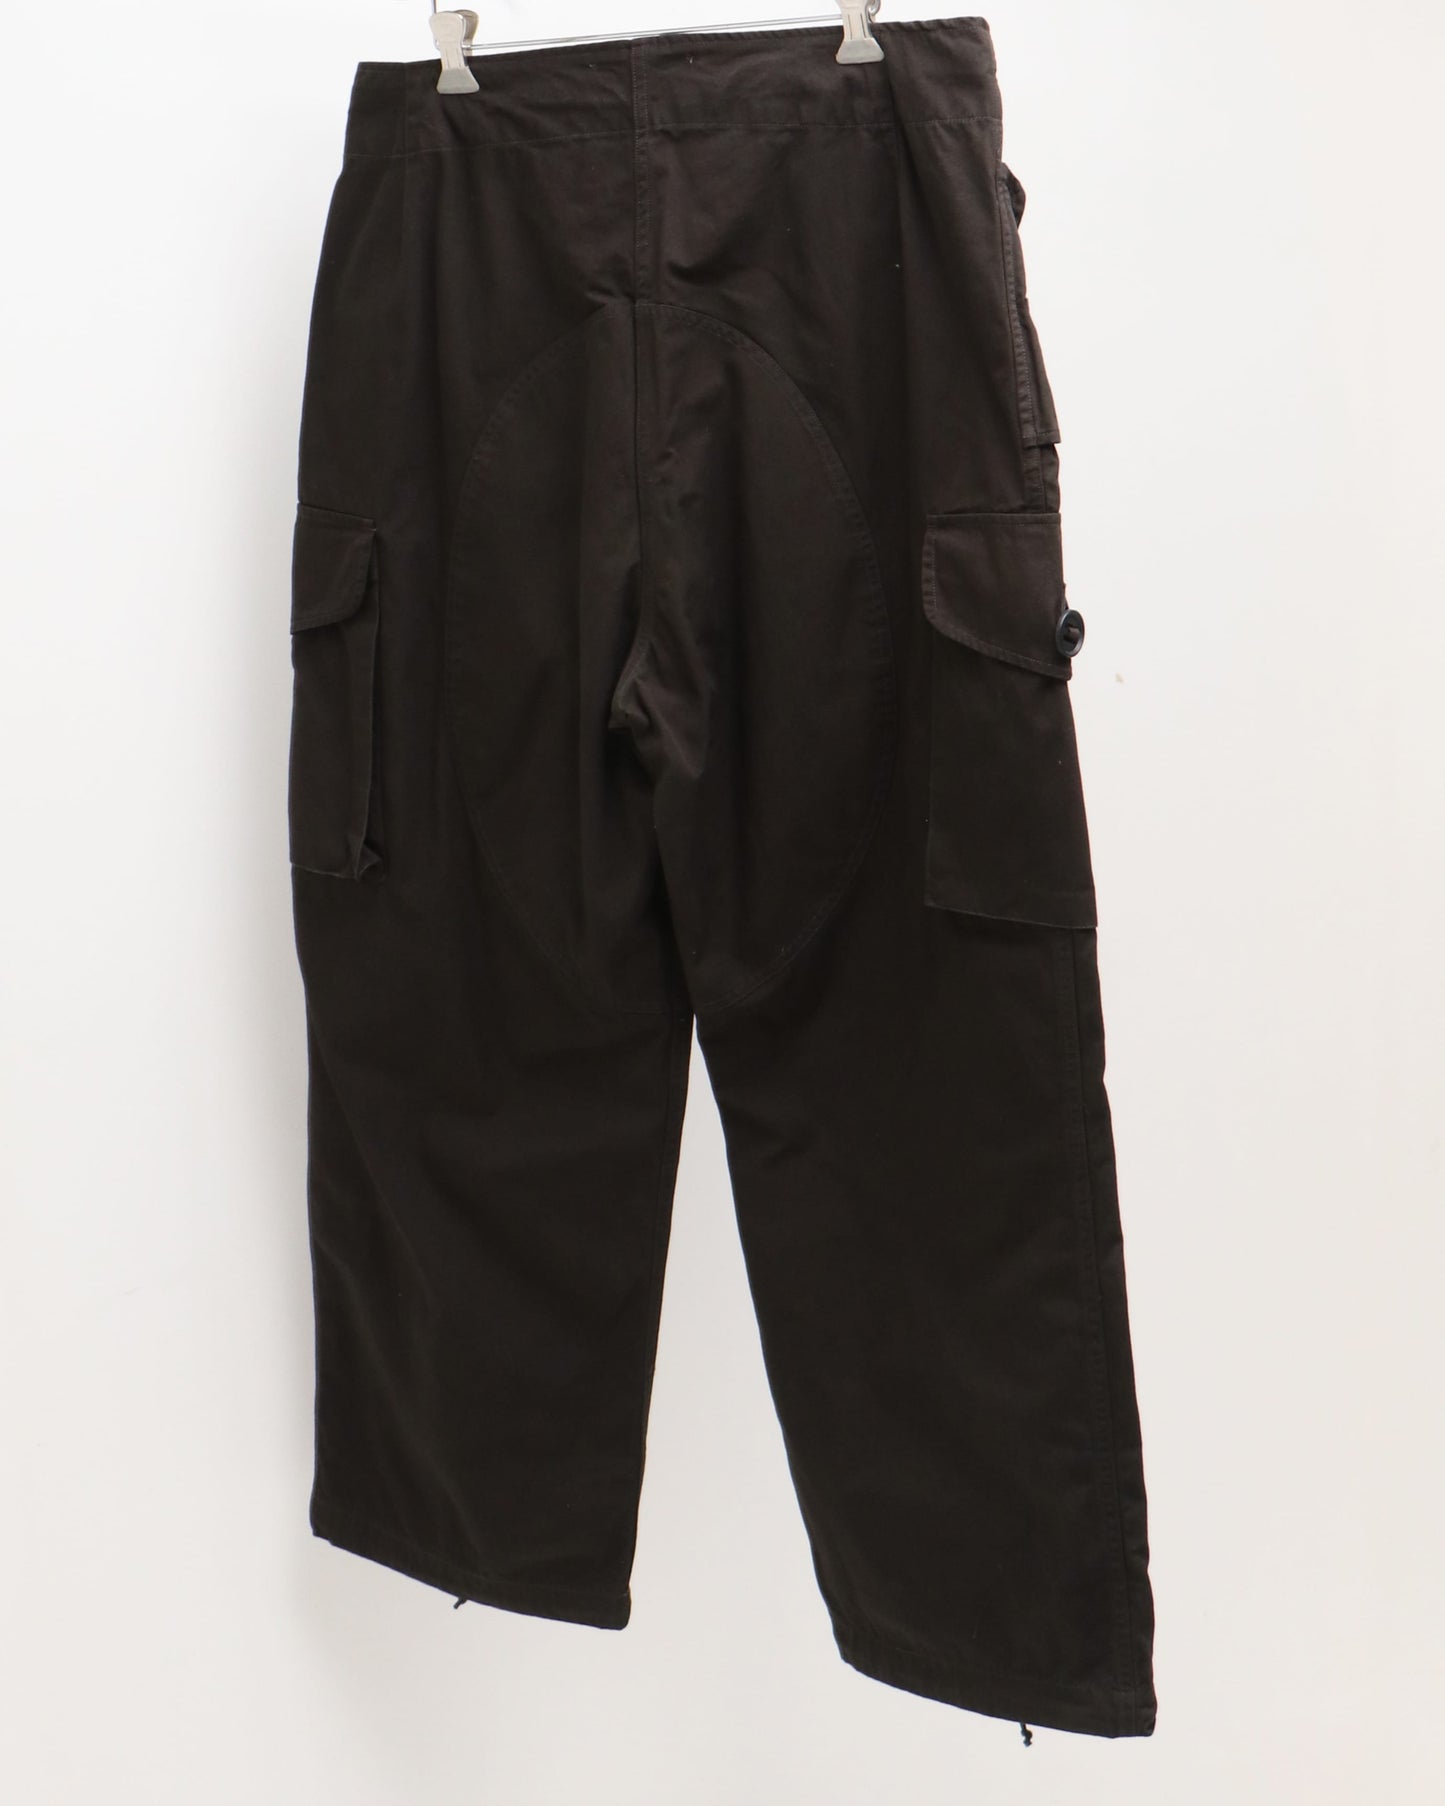 CANADIAN OVER PANTS CHARCOAL